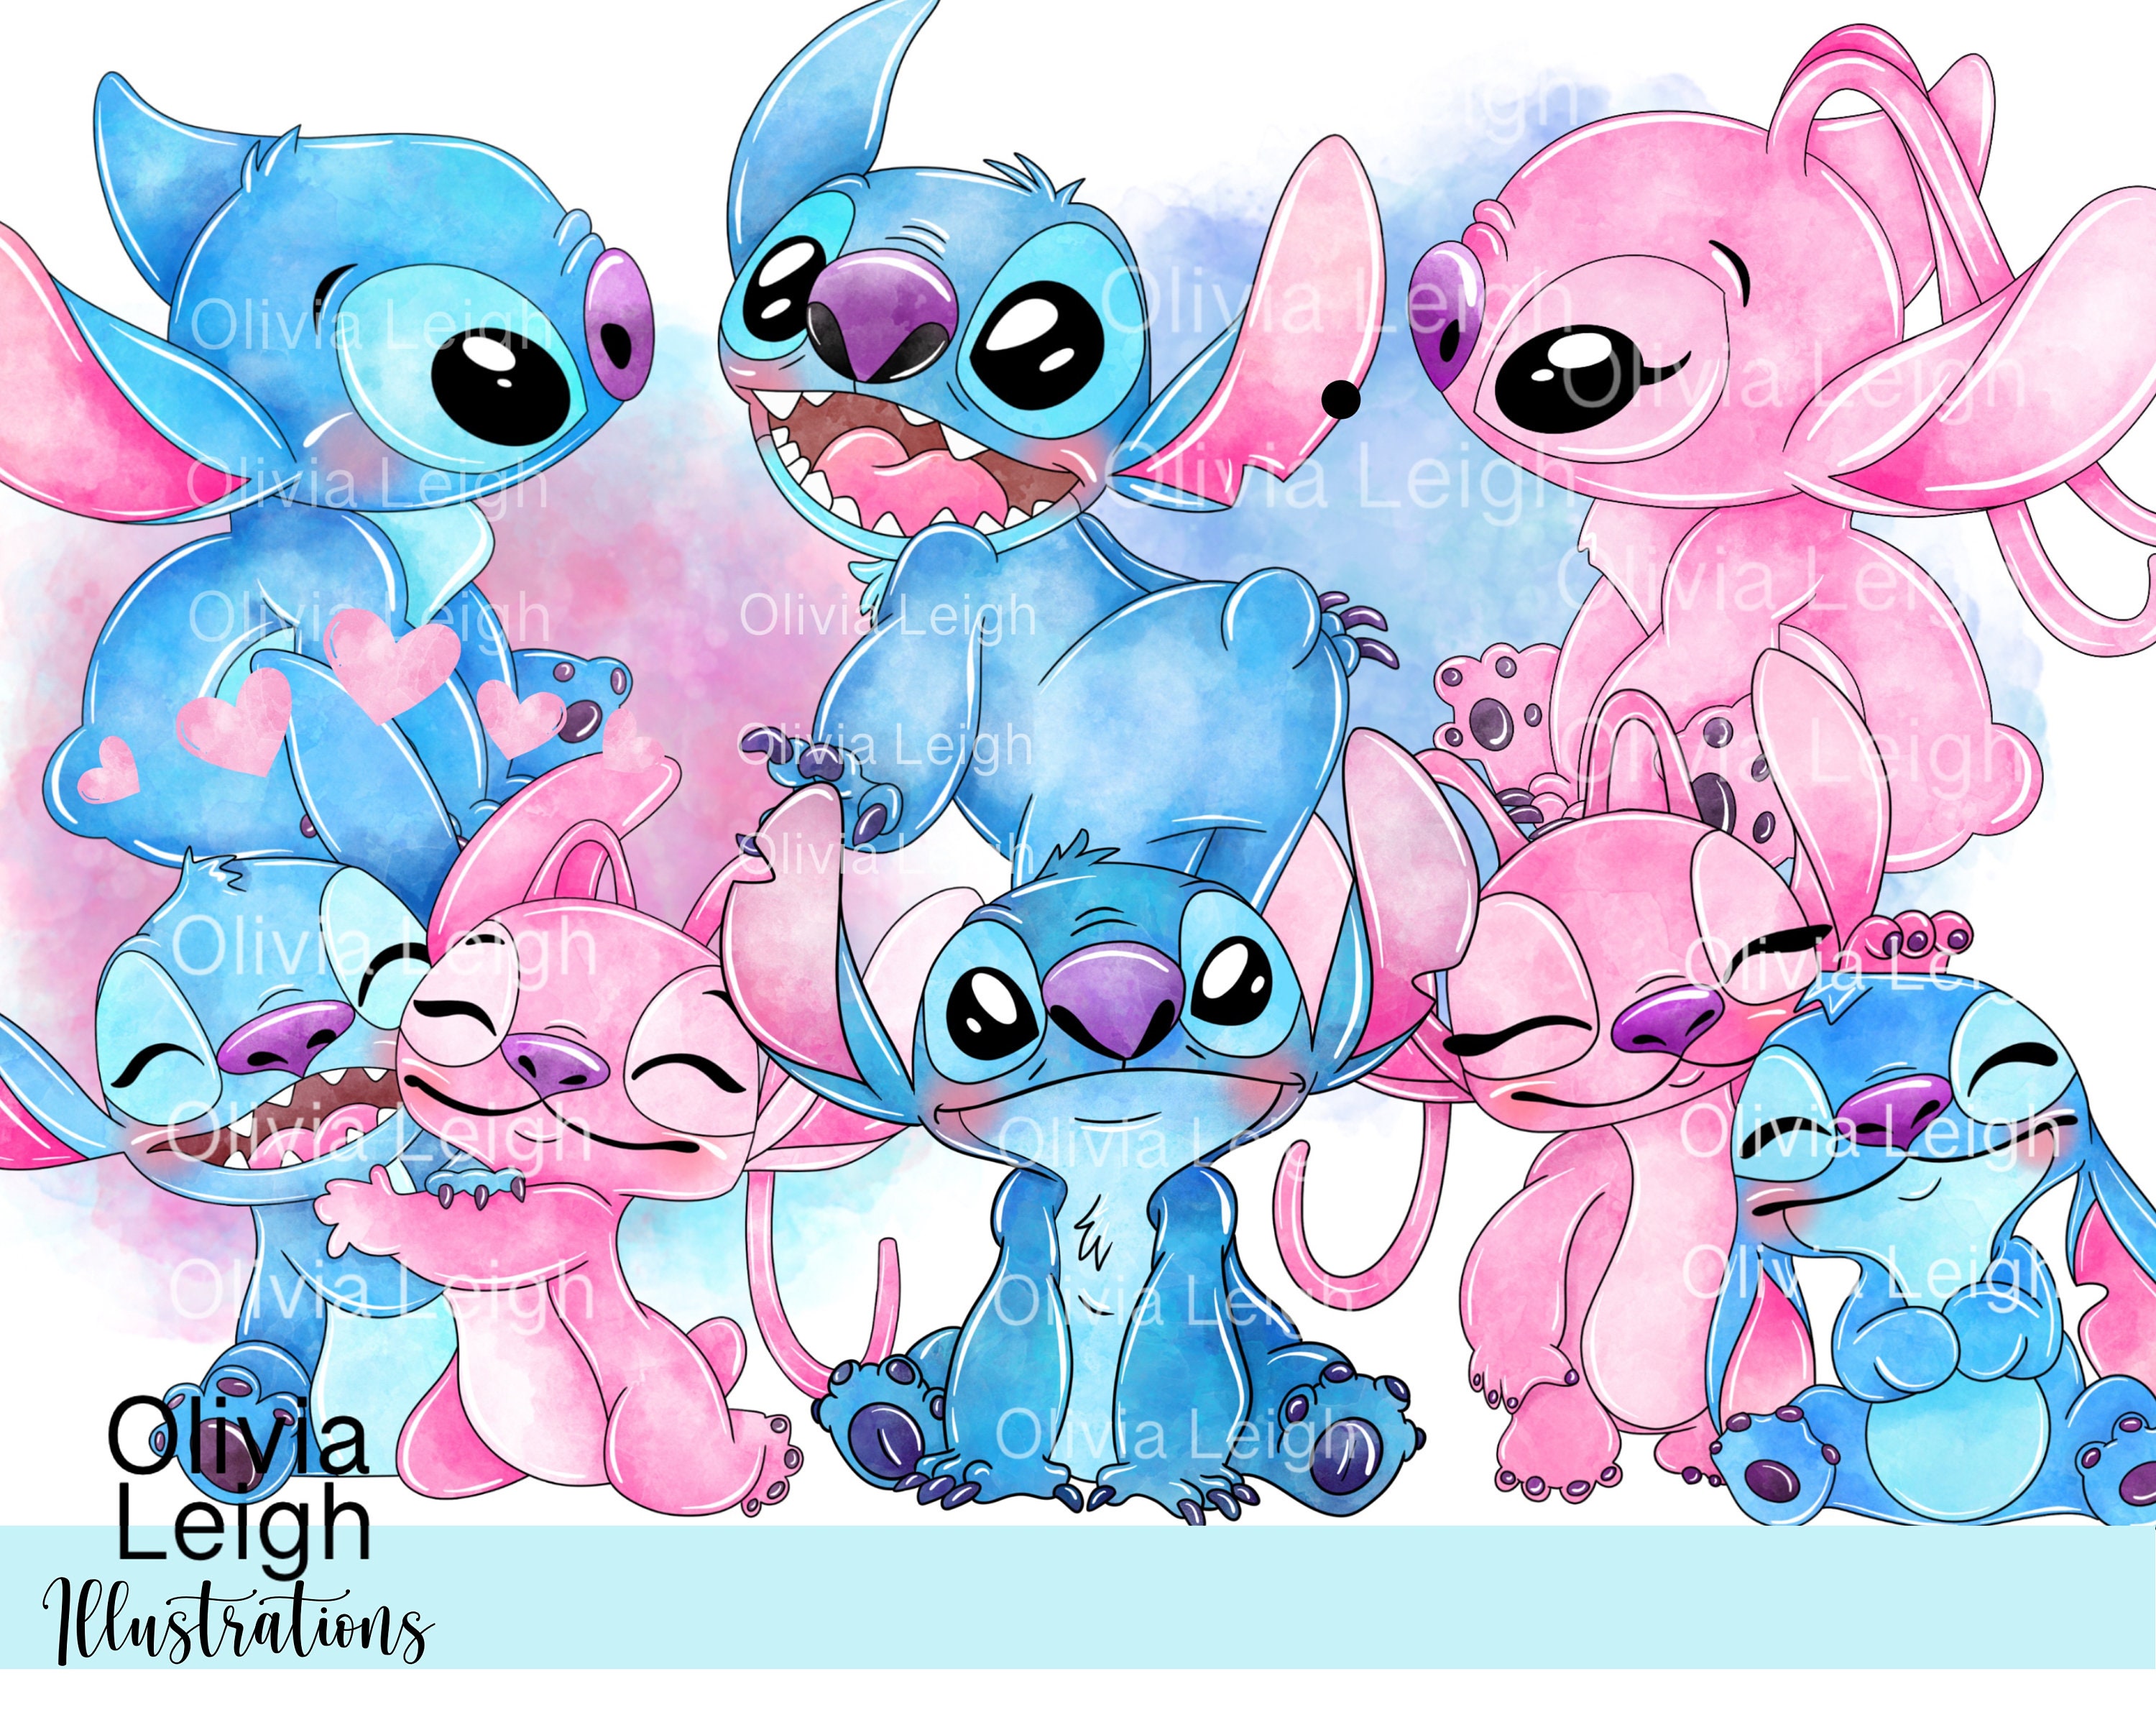 200+] Cute Stitch Wallpapers